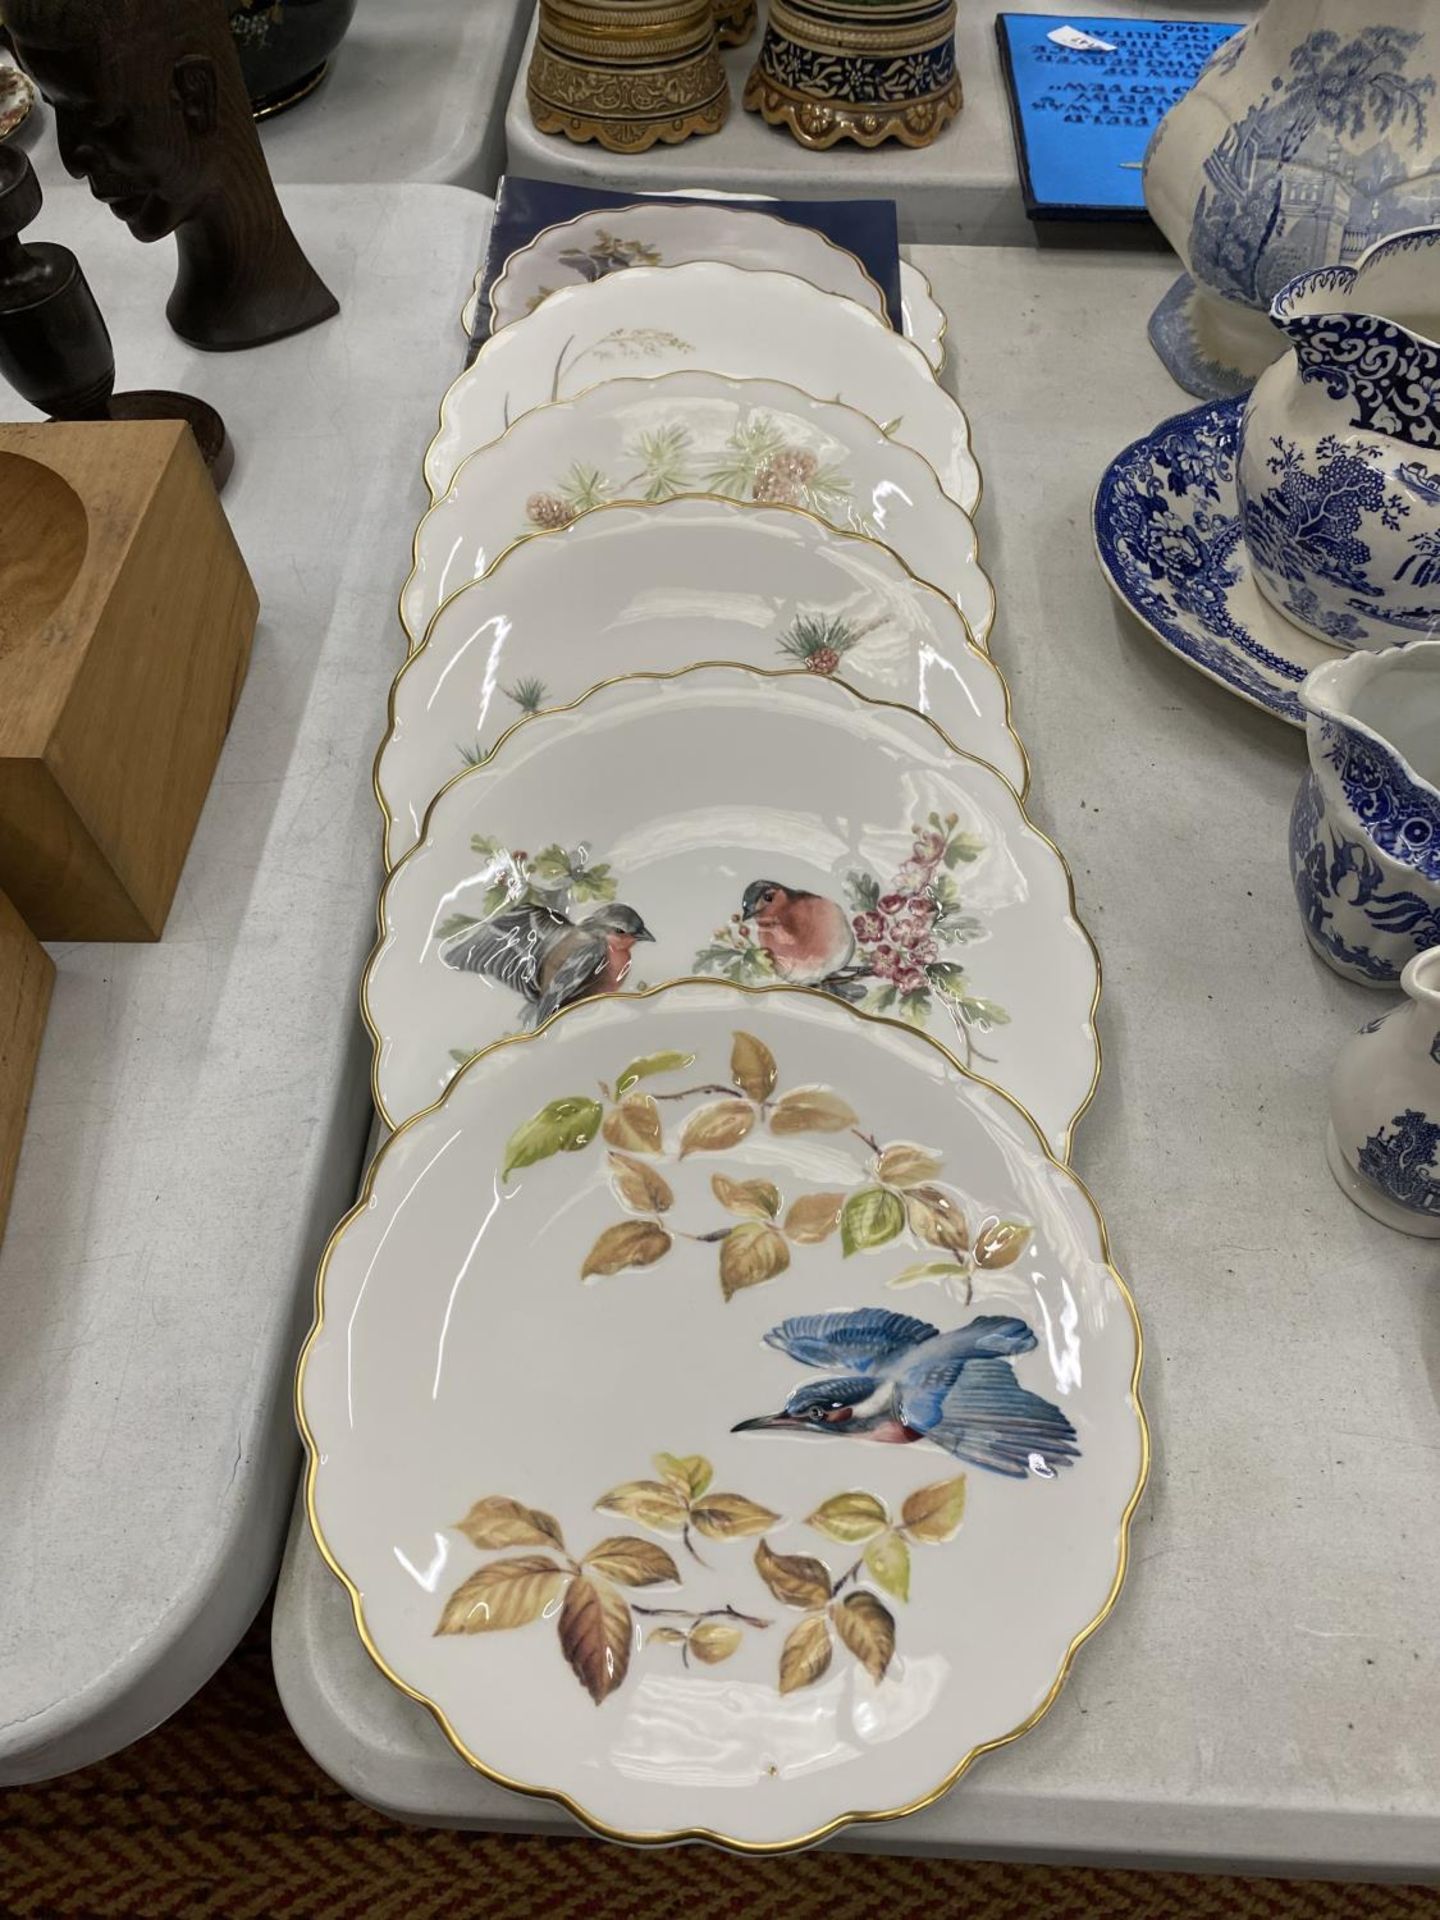 SIX COLLECTABLE 'THE BIRDS OF DOROTHY DOUGHTY DESSERT PLATES' TO INCLUDE KINGFISHER, ROBIN, ETC - Image 2 of 11